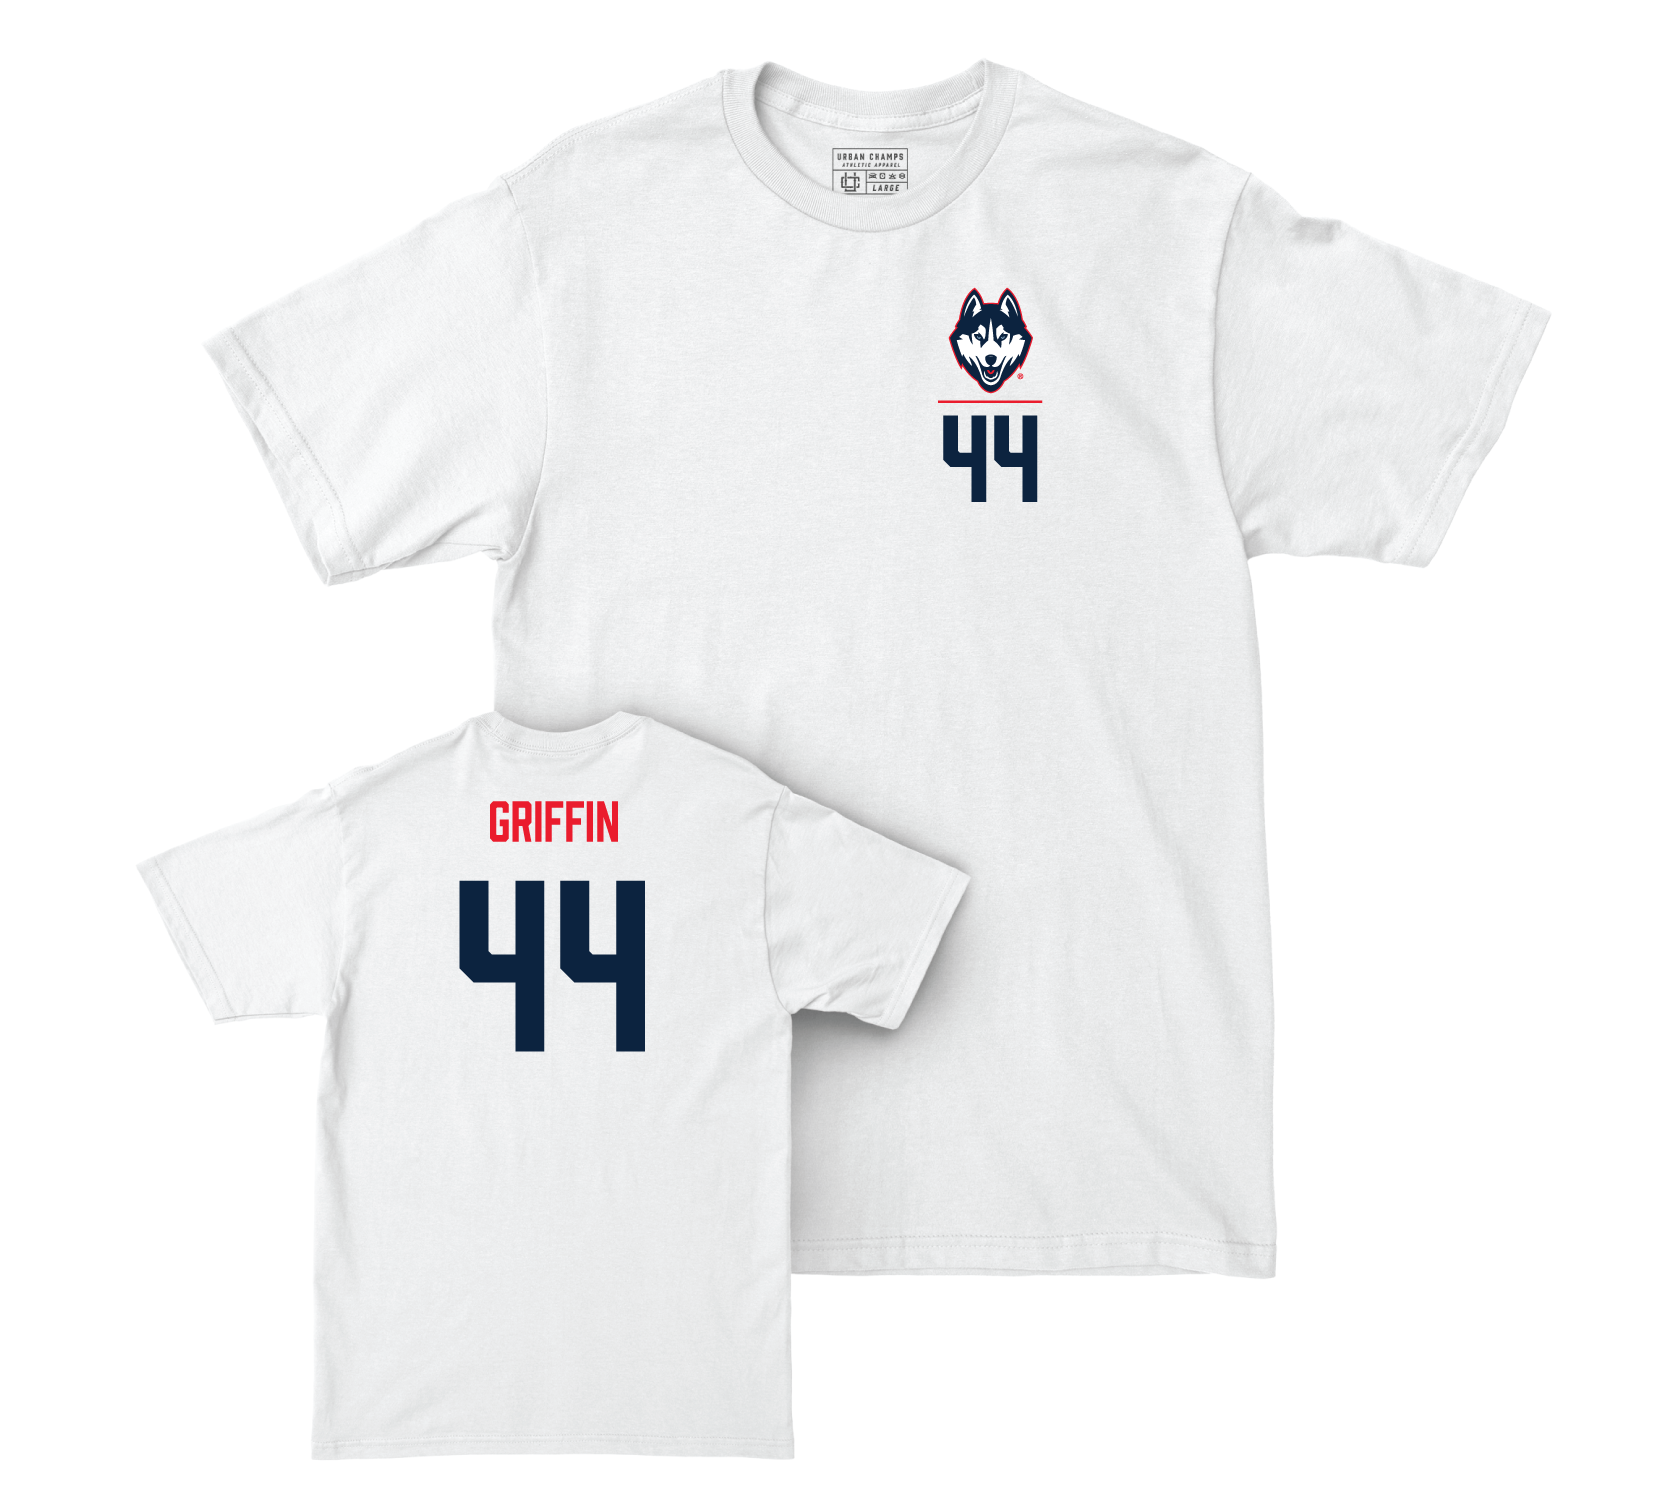 UConn Women's Basketball Logo White Comfort Colors Tee - Aubrey Griffin | #44 Small